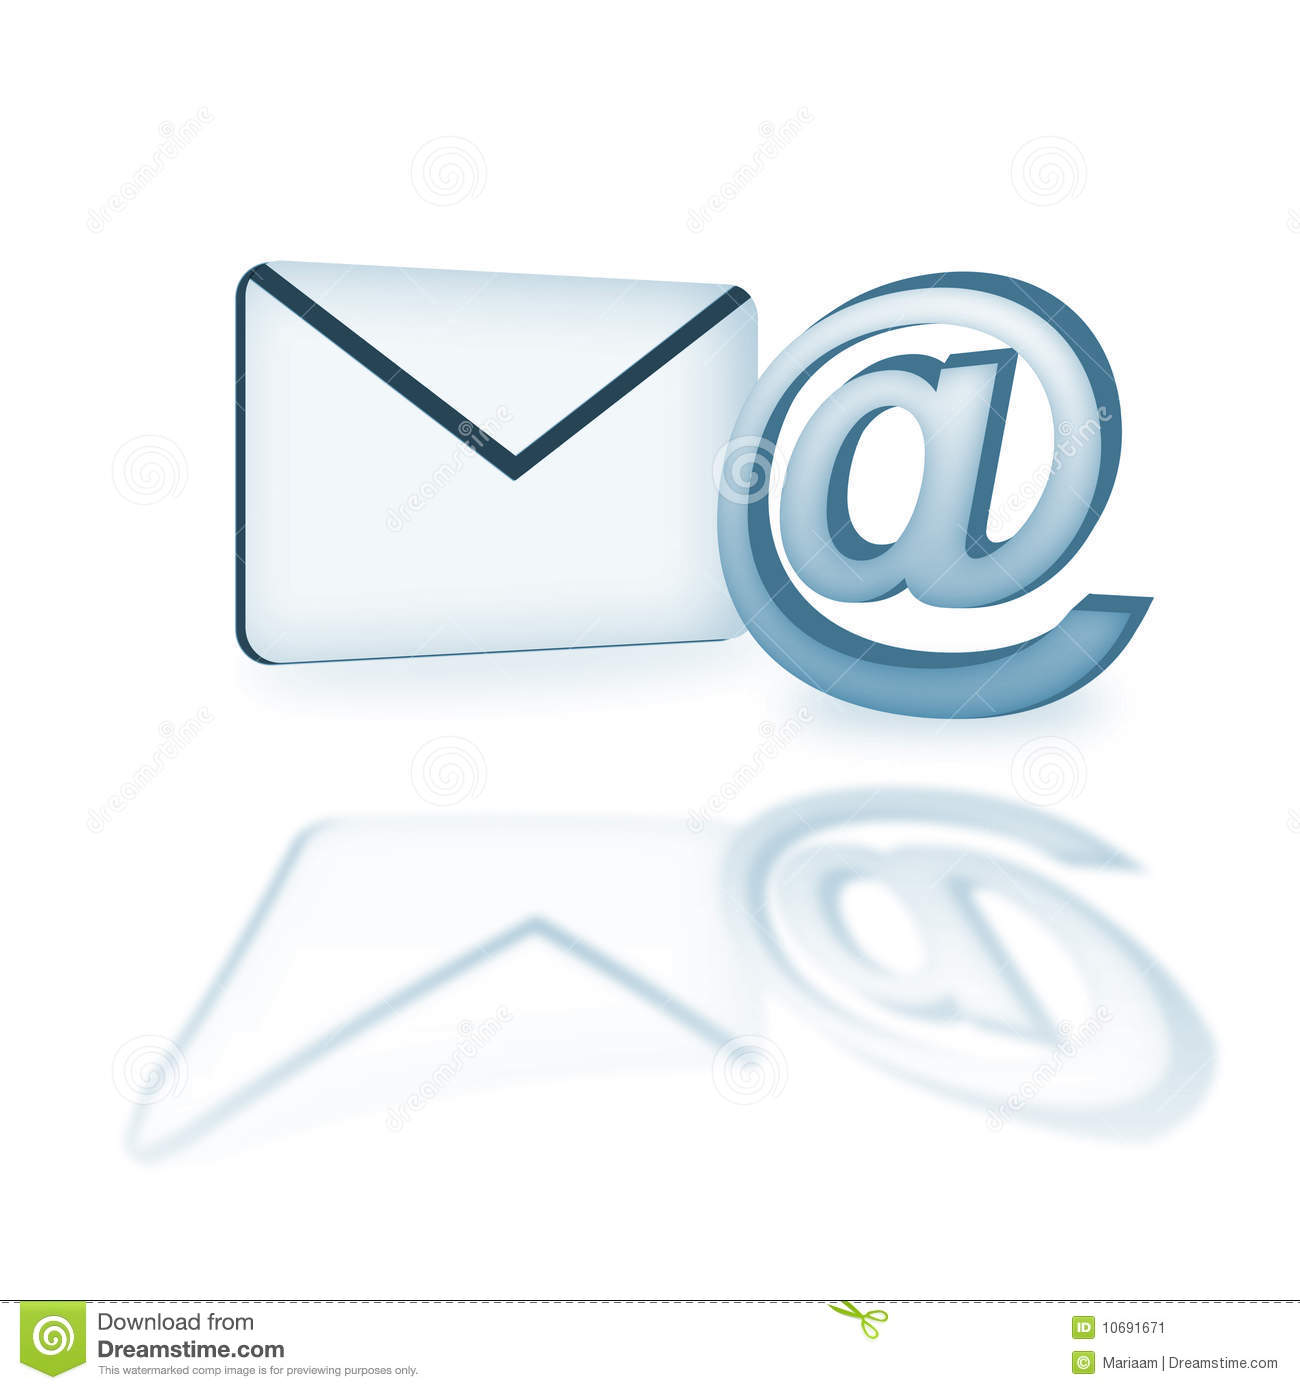 3D Email Icon